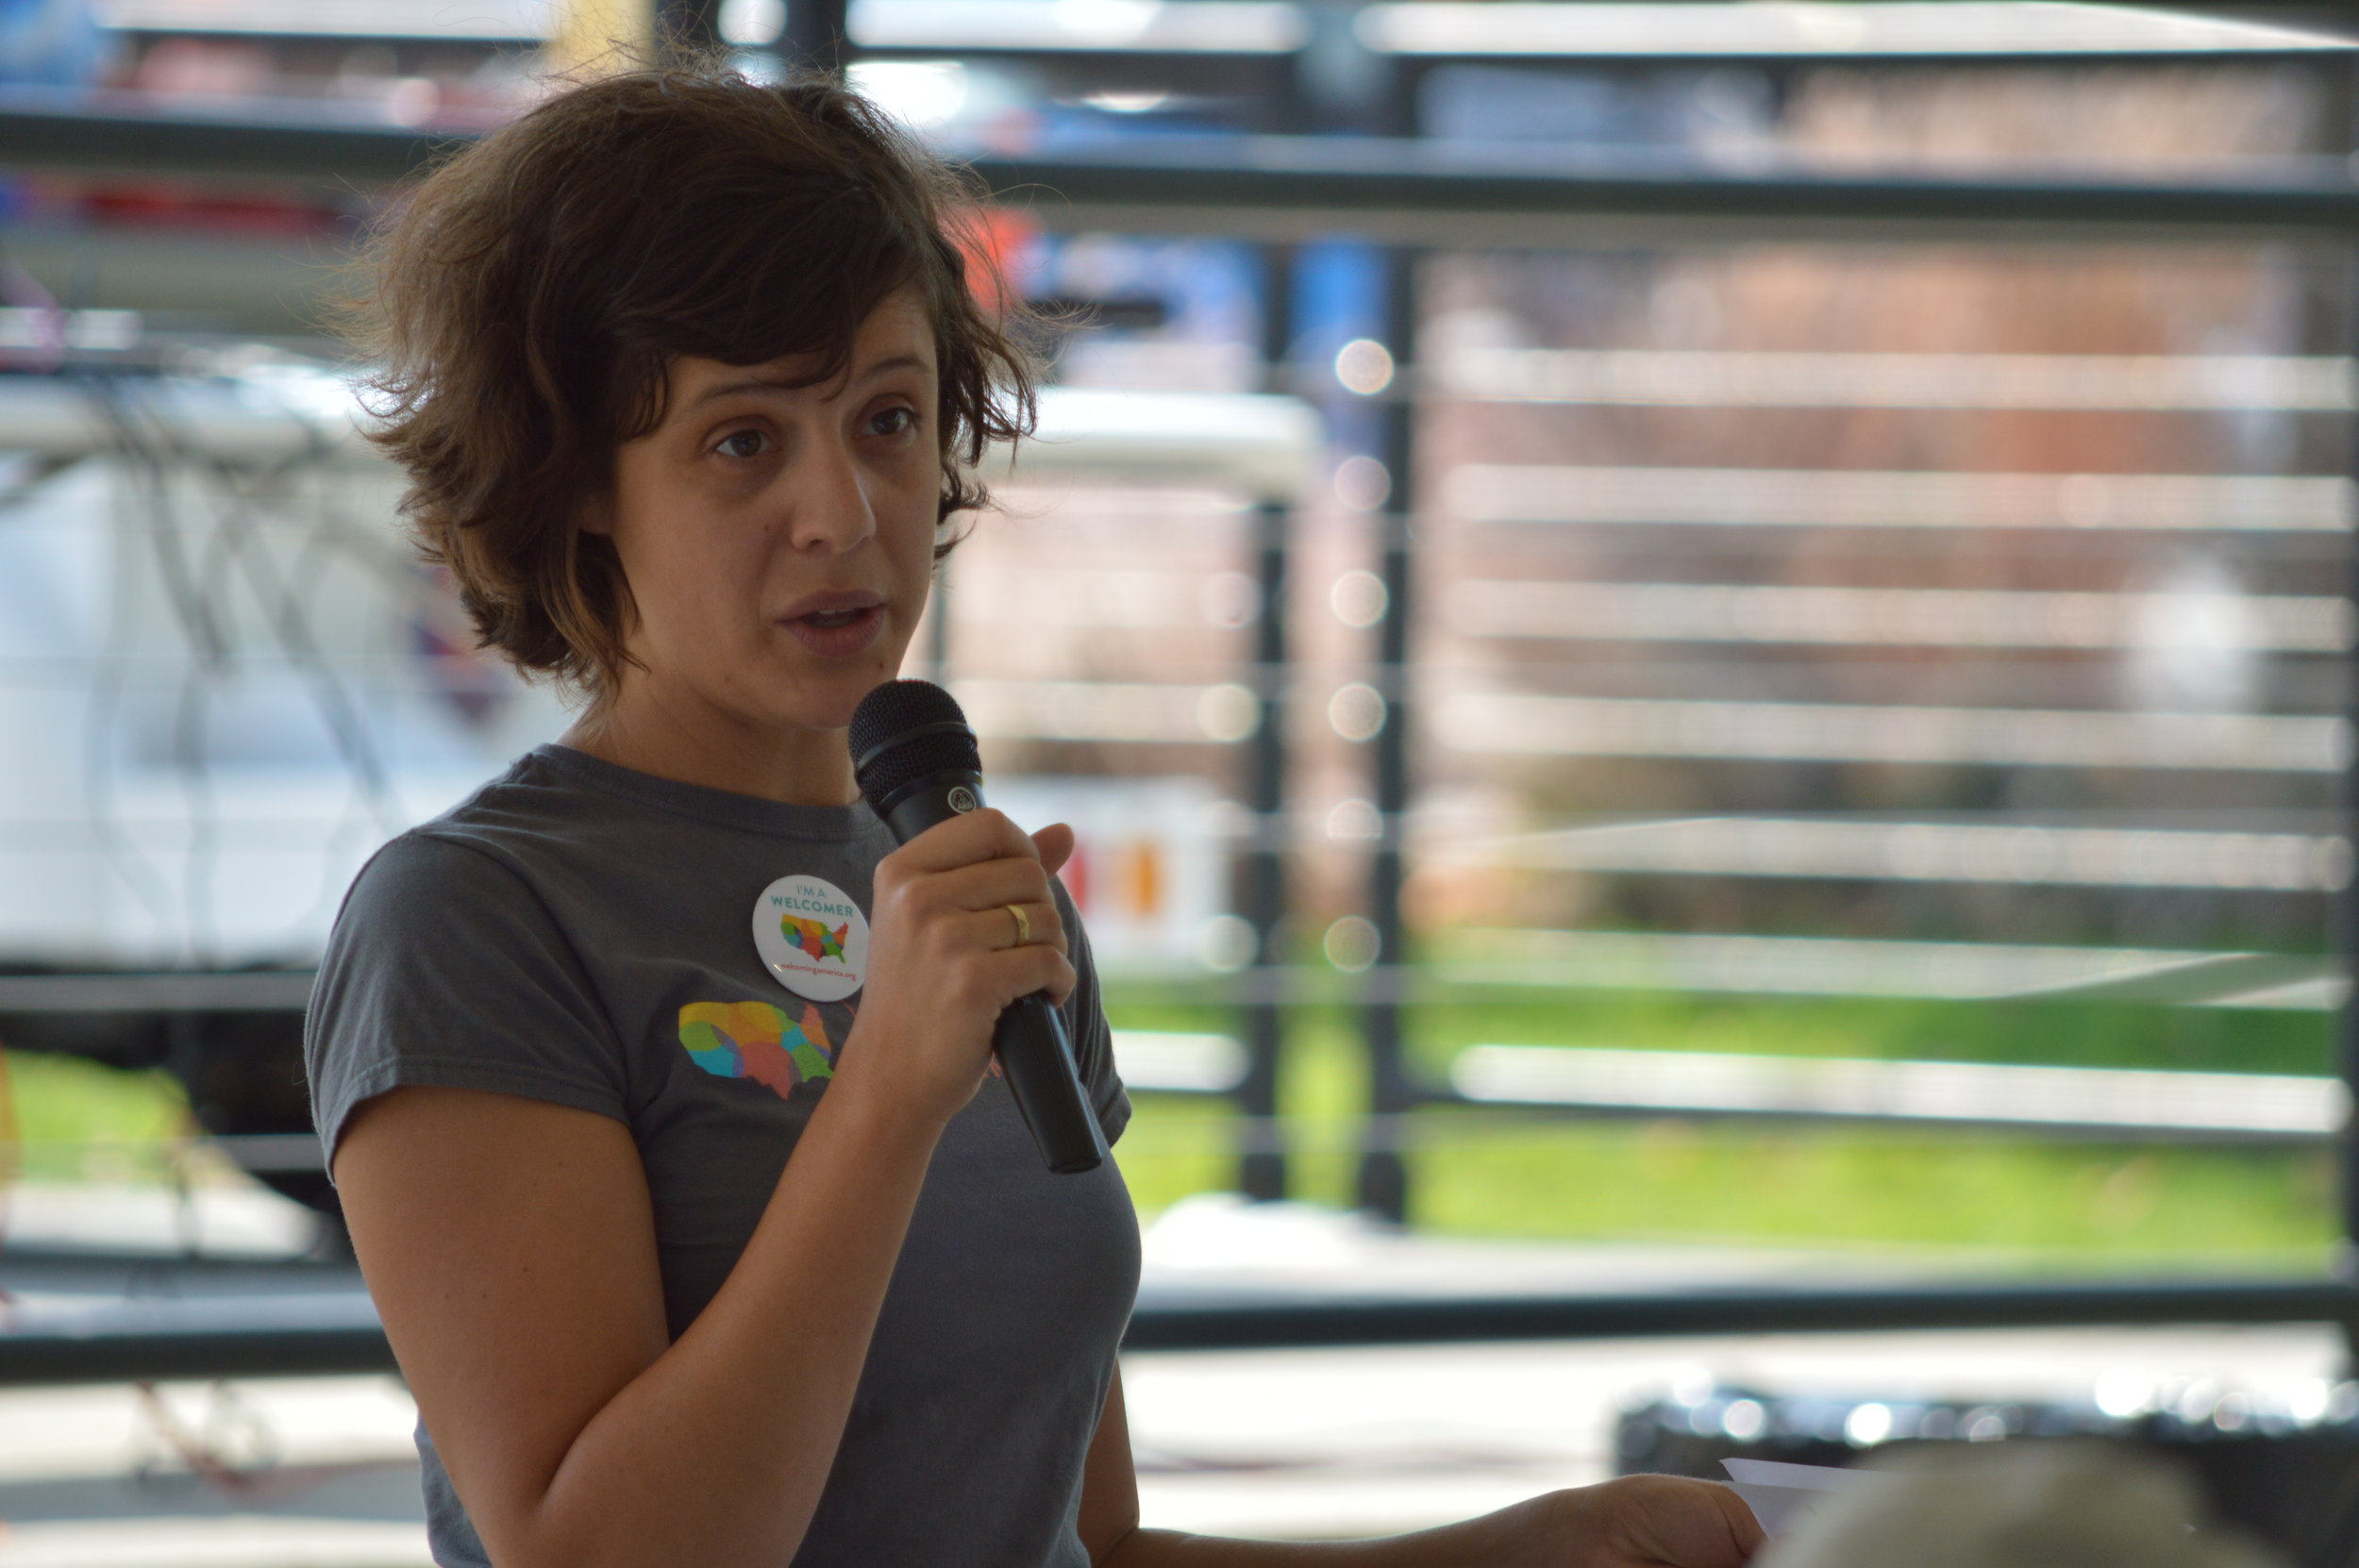 WelcomeNWA Director Margot Lemaster talked Saturday at a National Welcoming Week event in Springdale about the Northwest Arkansas Council's new initiative.